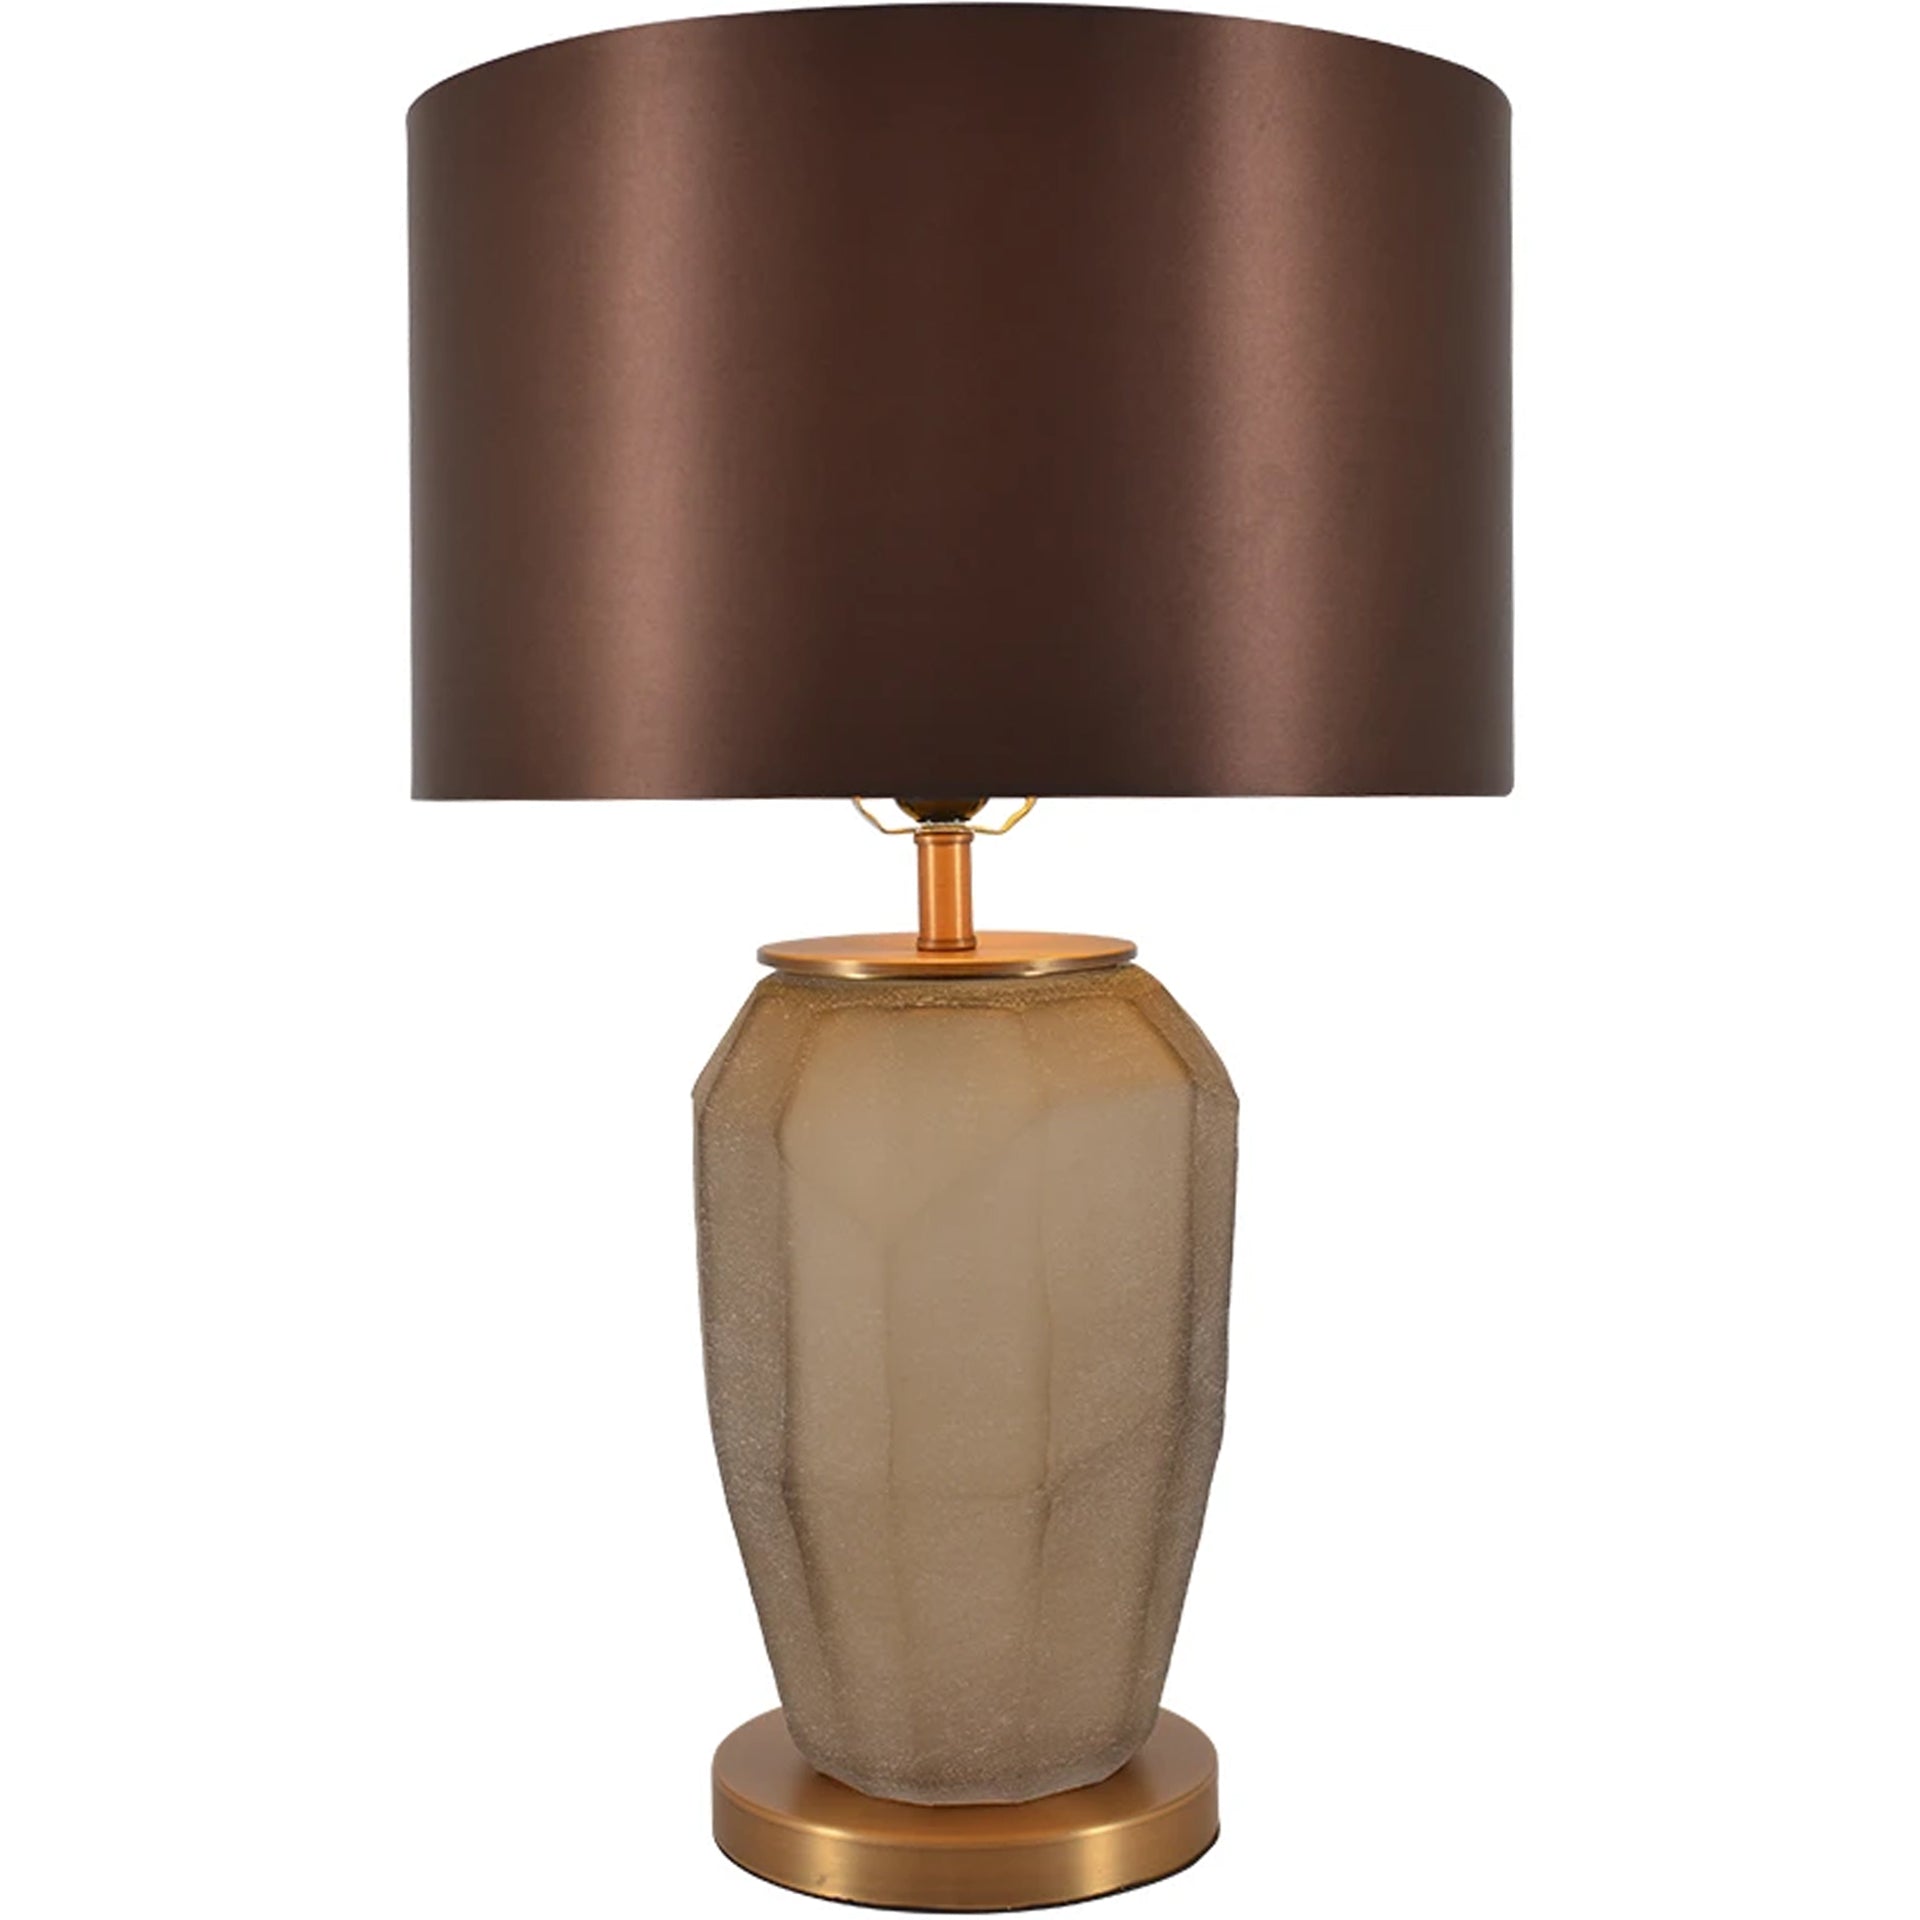 Carro Home Iris Sculpted Glass Table Lamp 23&quot; - Spiced Apricot/Chocolate Brown